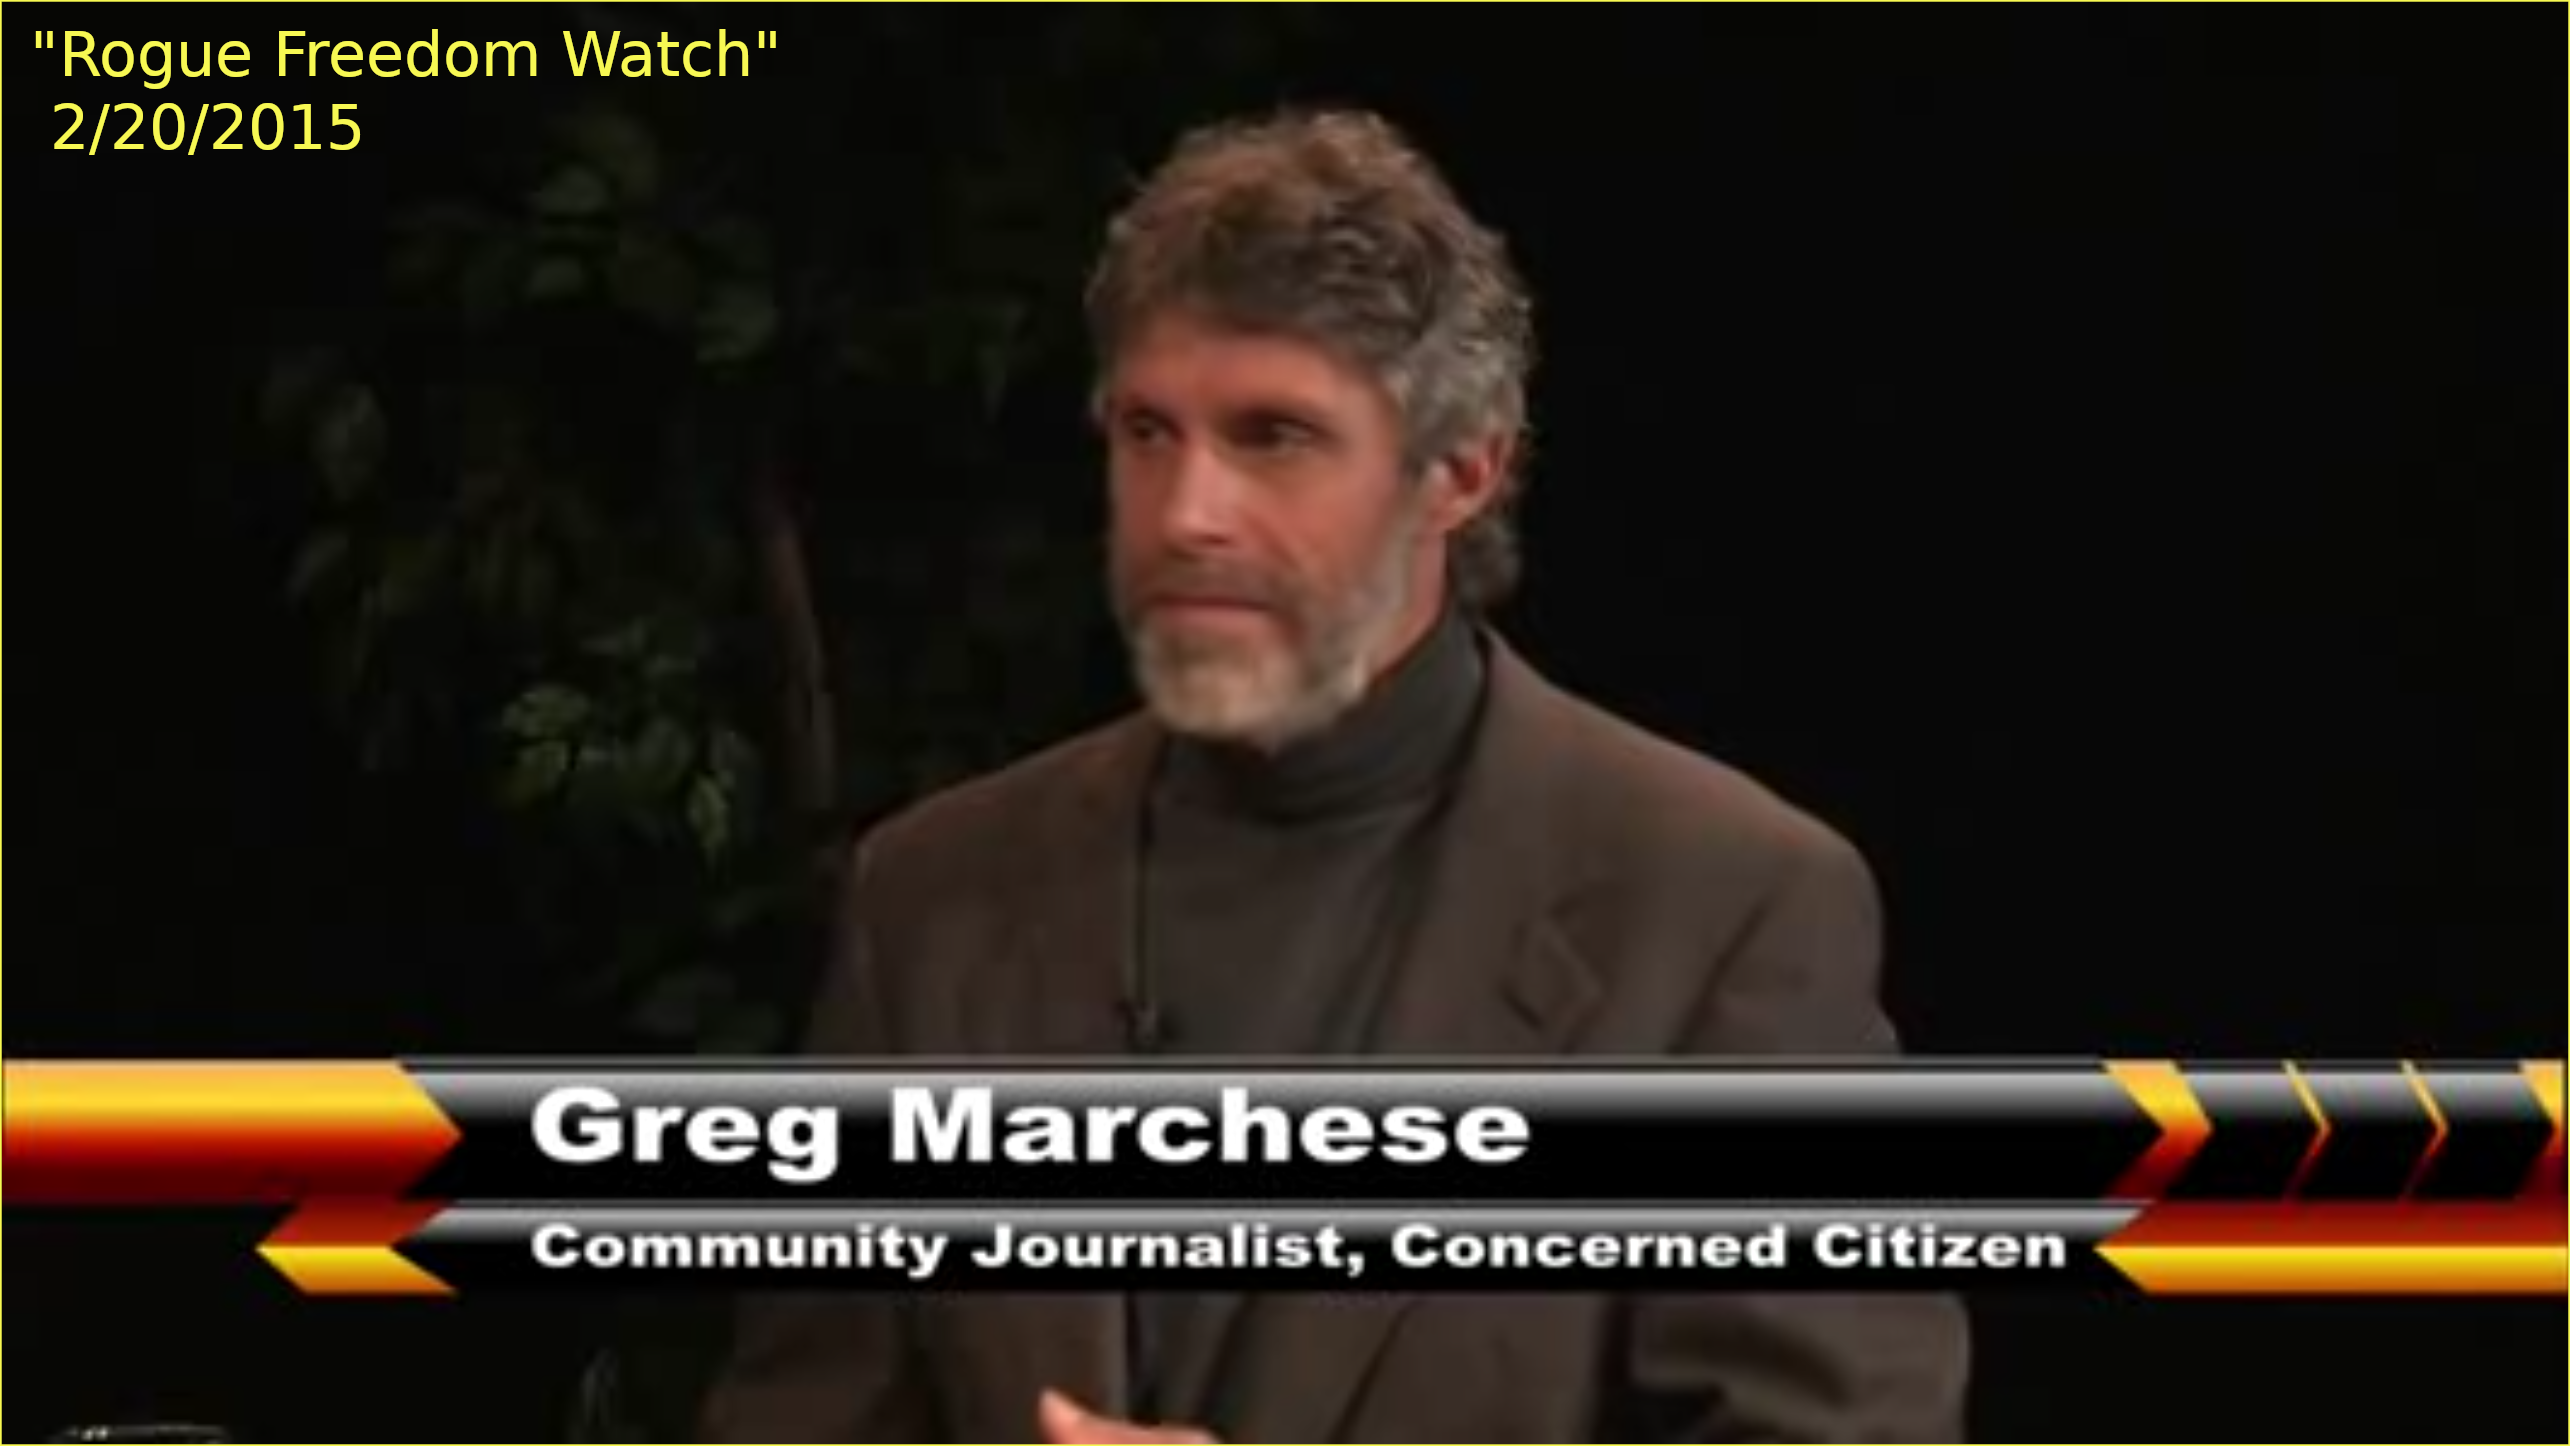 - IMAGE - Marchese from Rogue Freedom Watch video